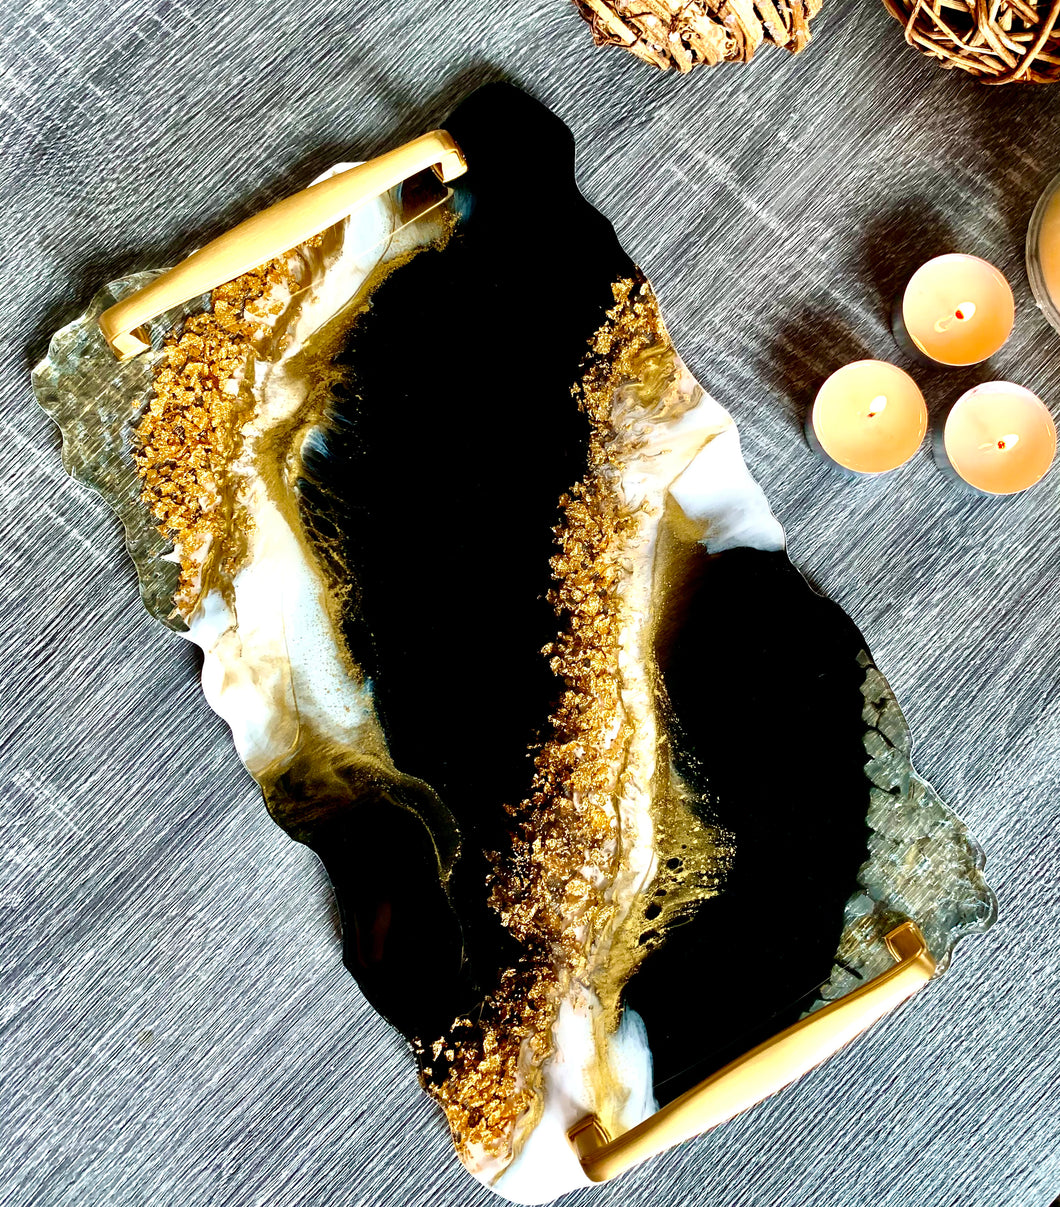 Marbleized Black, White and Gold - Tray - Resin, Gold leaf, Fireglass